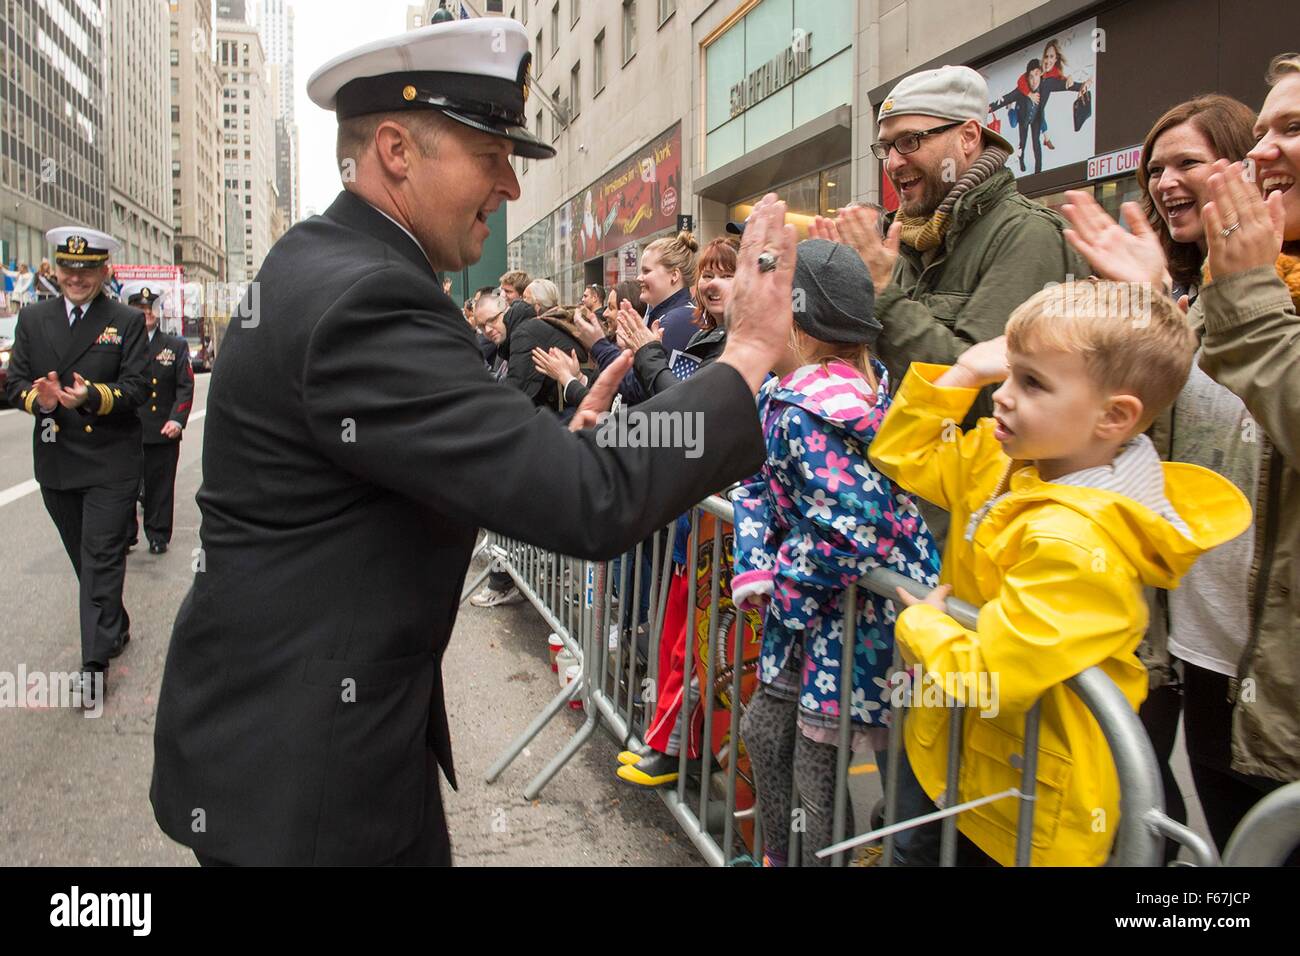 The U.S. Navy Sailors from the amphibious transport dock ship USS New York greet people gathered for the annual Veterans Day parade during Veterans Week November 11, 2015 in New York City, NY. Stock Photo